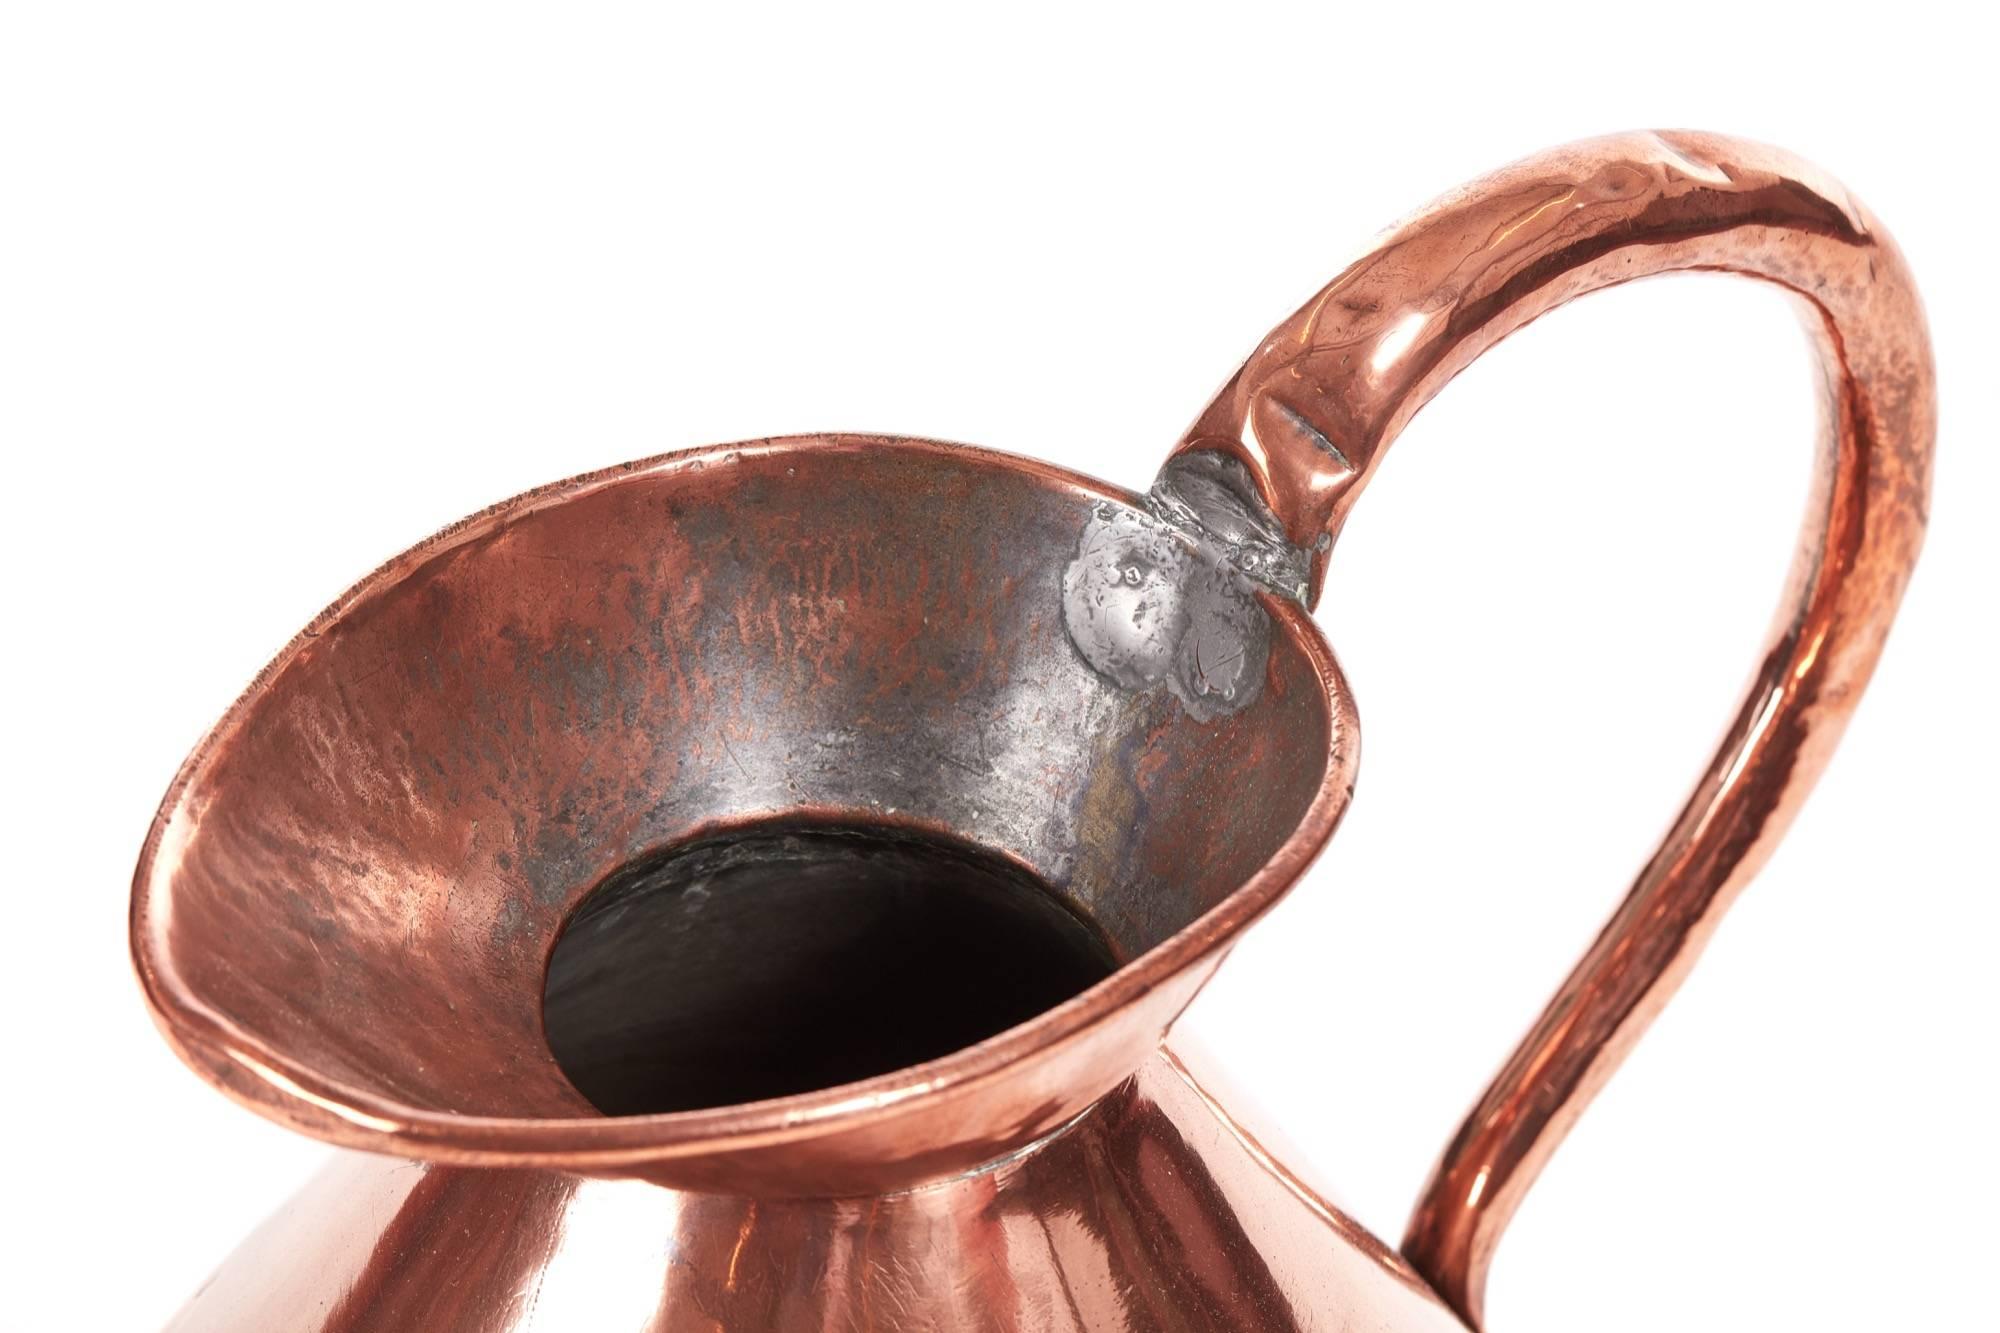 Large antique copper harvest measure, with a lovely shaped body and handle.
Lovely original item
Measures: 20